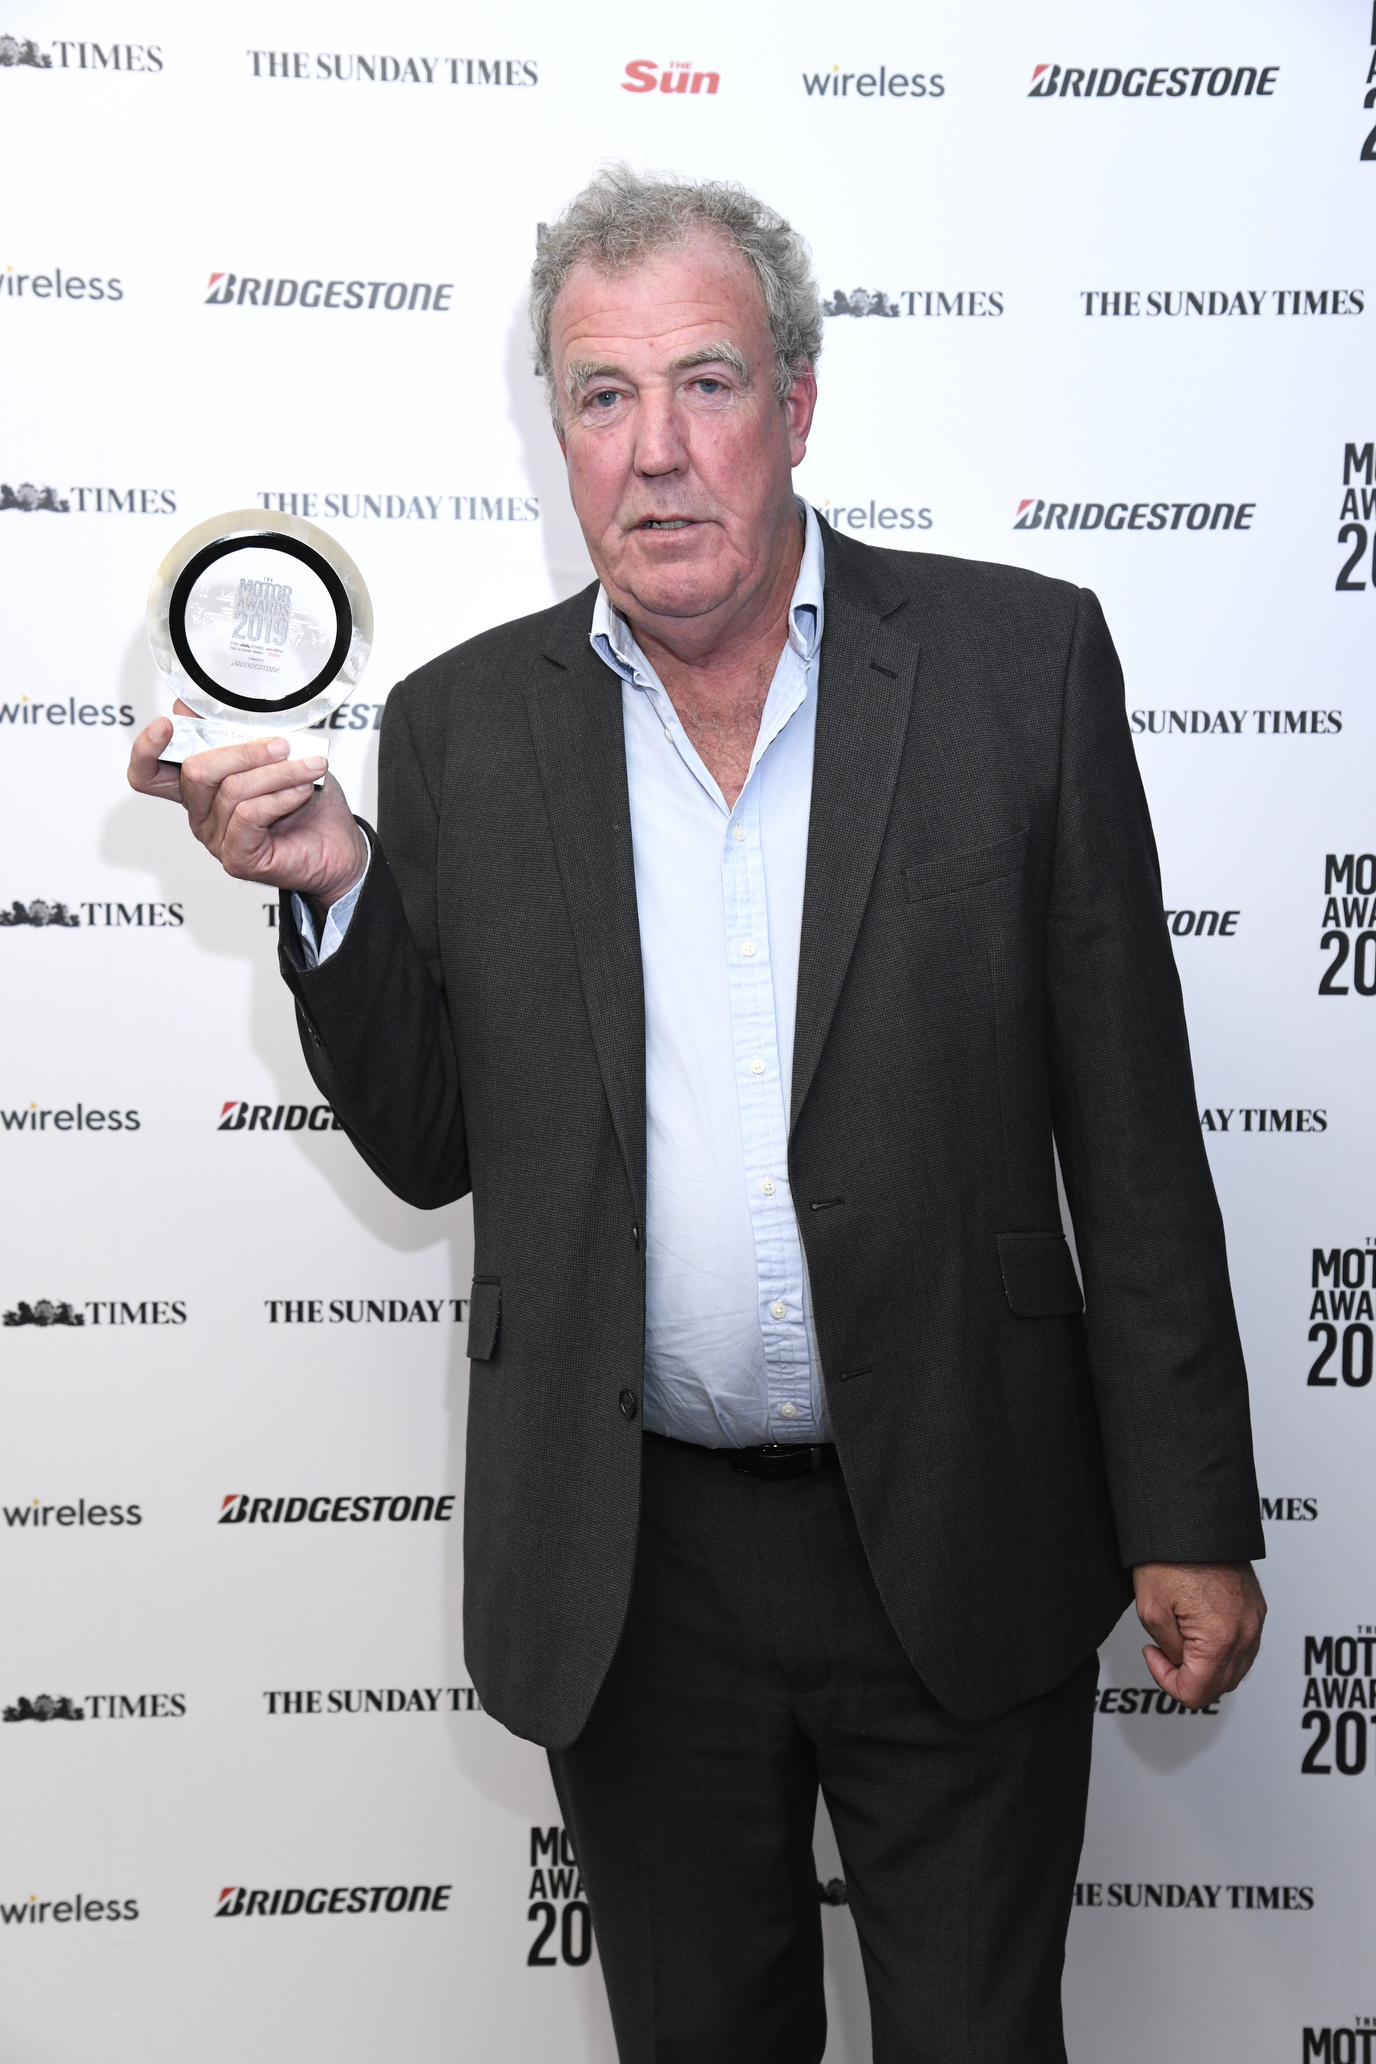 Watch Jeremy Clarkson reveal his cars of the year at Sunday Times Motor Awards